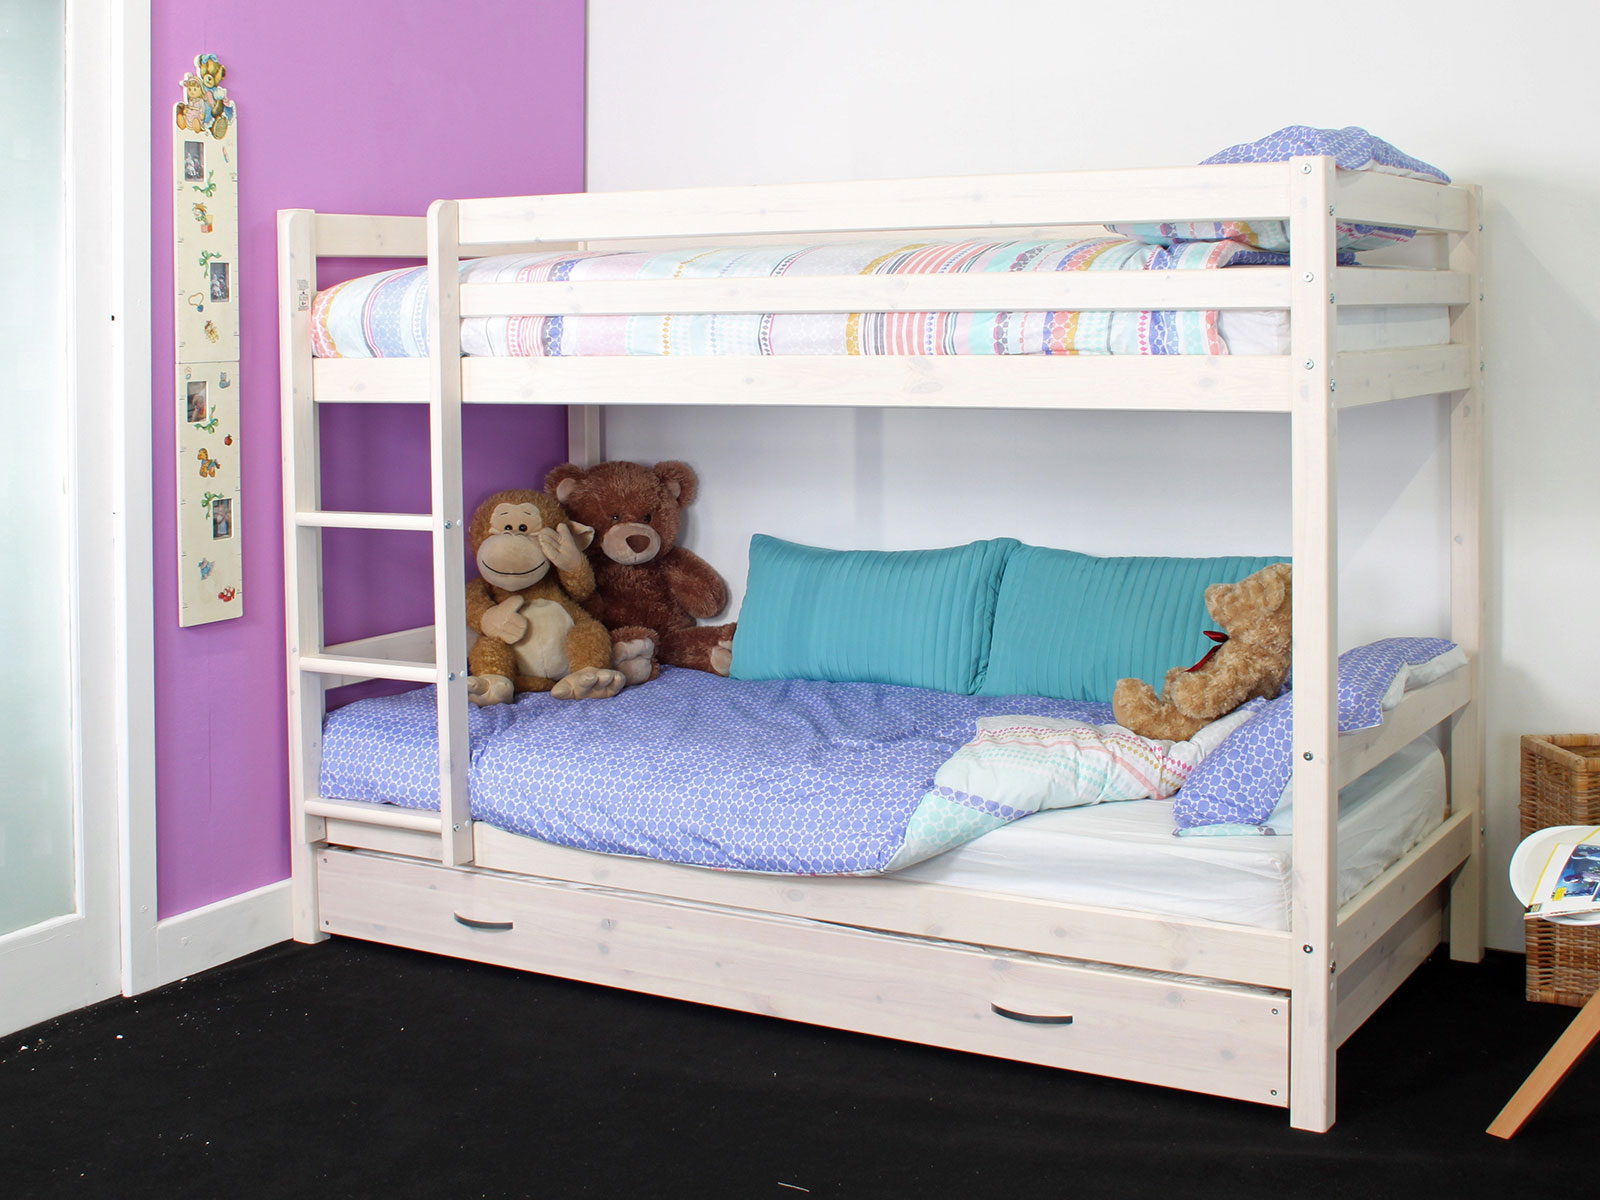 Kids Avenue Flexa Hit 5 Bunkbed with Trundle Drawer